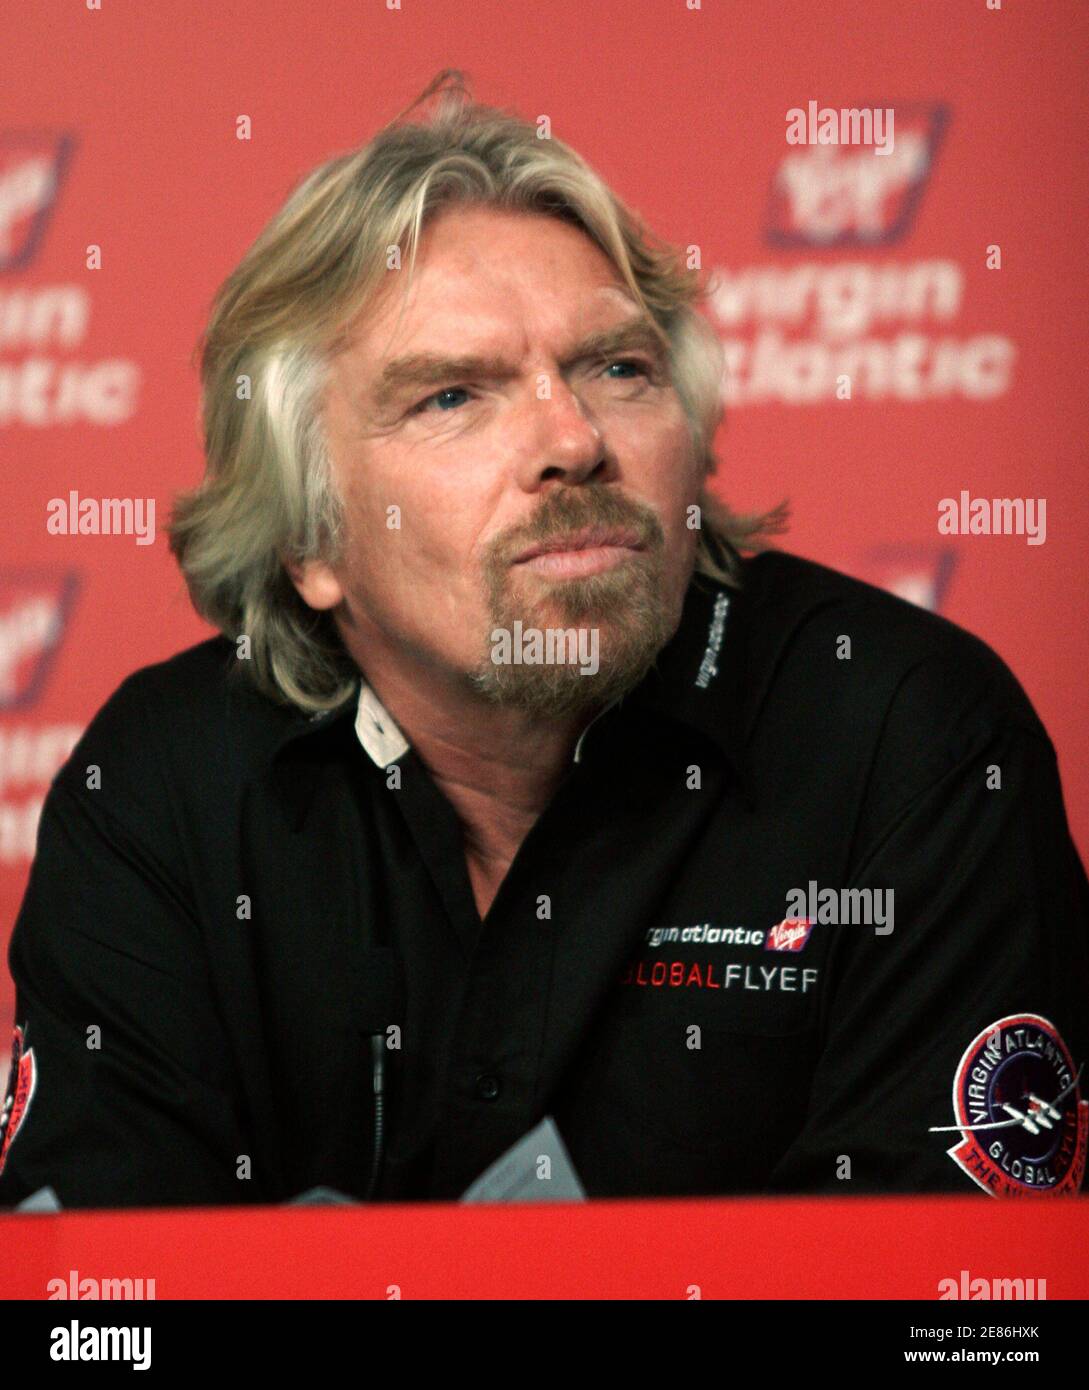 Sir Richard Branson, Chairman of the Virgin Group listens to question from reporters at the Kennedy Space Center in Cape Canaveral, Florida on February 6, 2006. Virgin Atlantic is sponsoring the GlobalfFlyer, an aircraft piloted by Steve Fossett, that will attempt a world record flight around the globe. Fossett hopes to cover a distance of 29,000 miles in around 90 hours. REUTERS/Rick Fowler Stock Photo